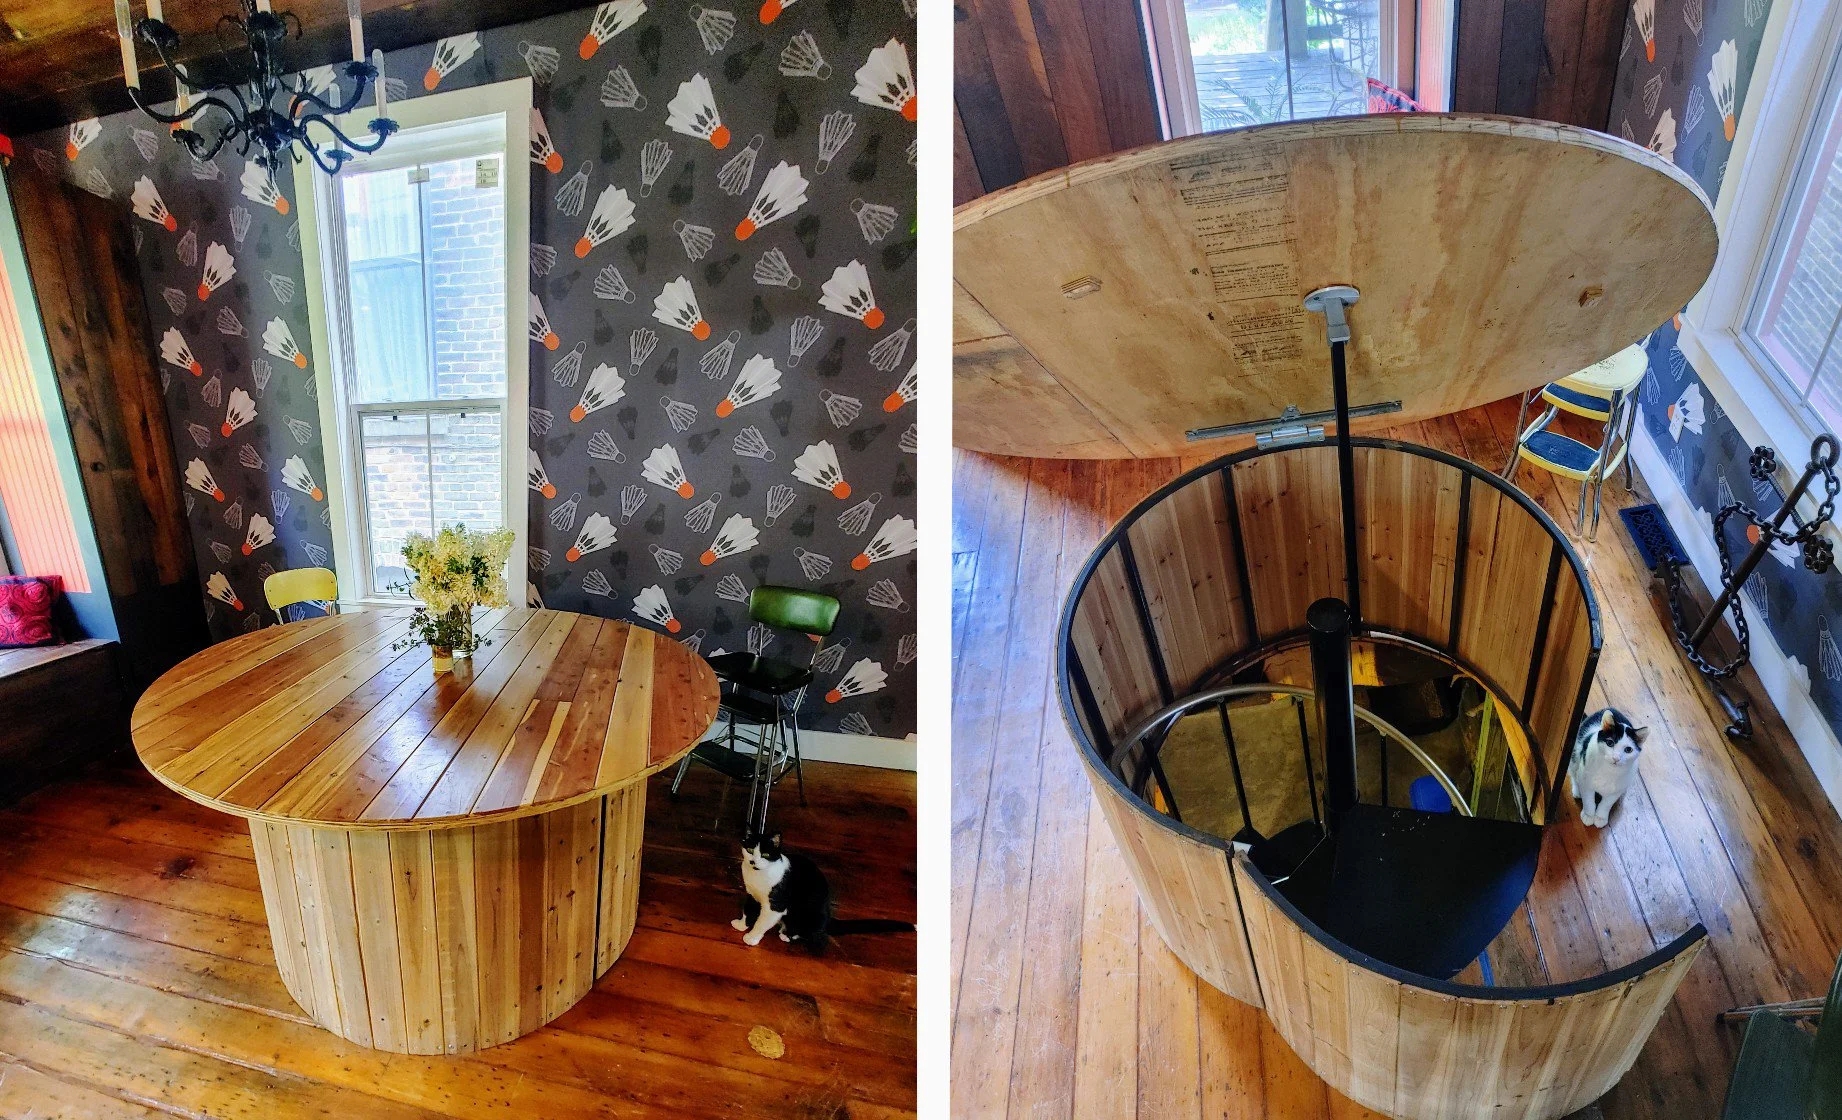 secret spiral staircase inside a table